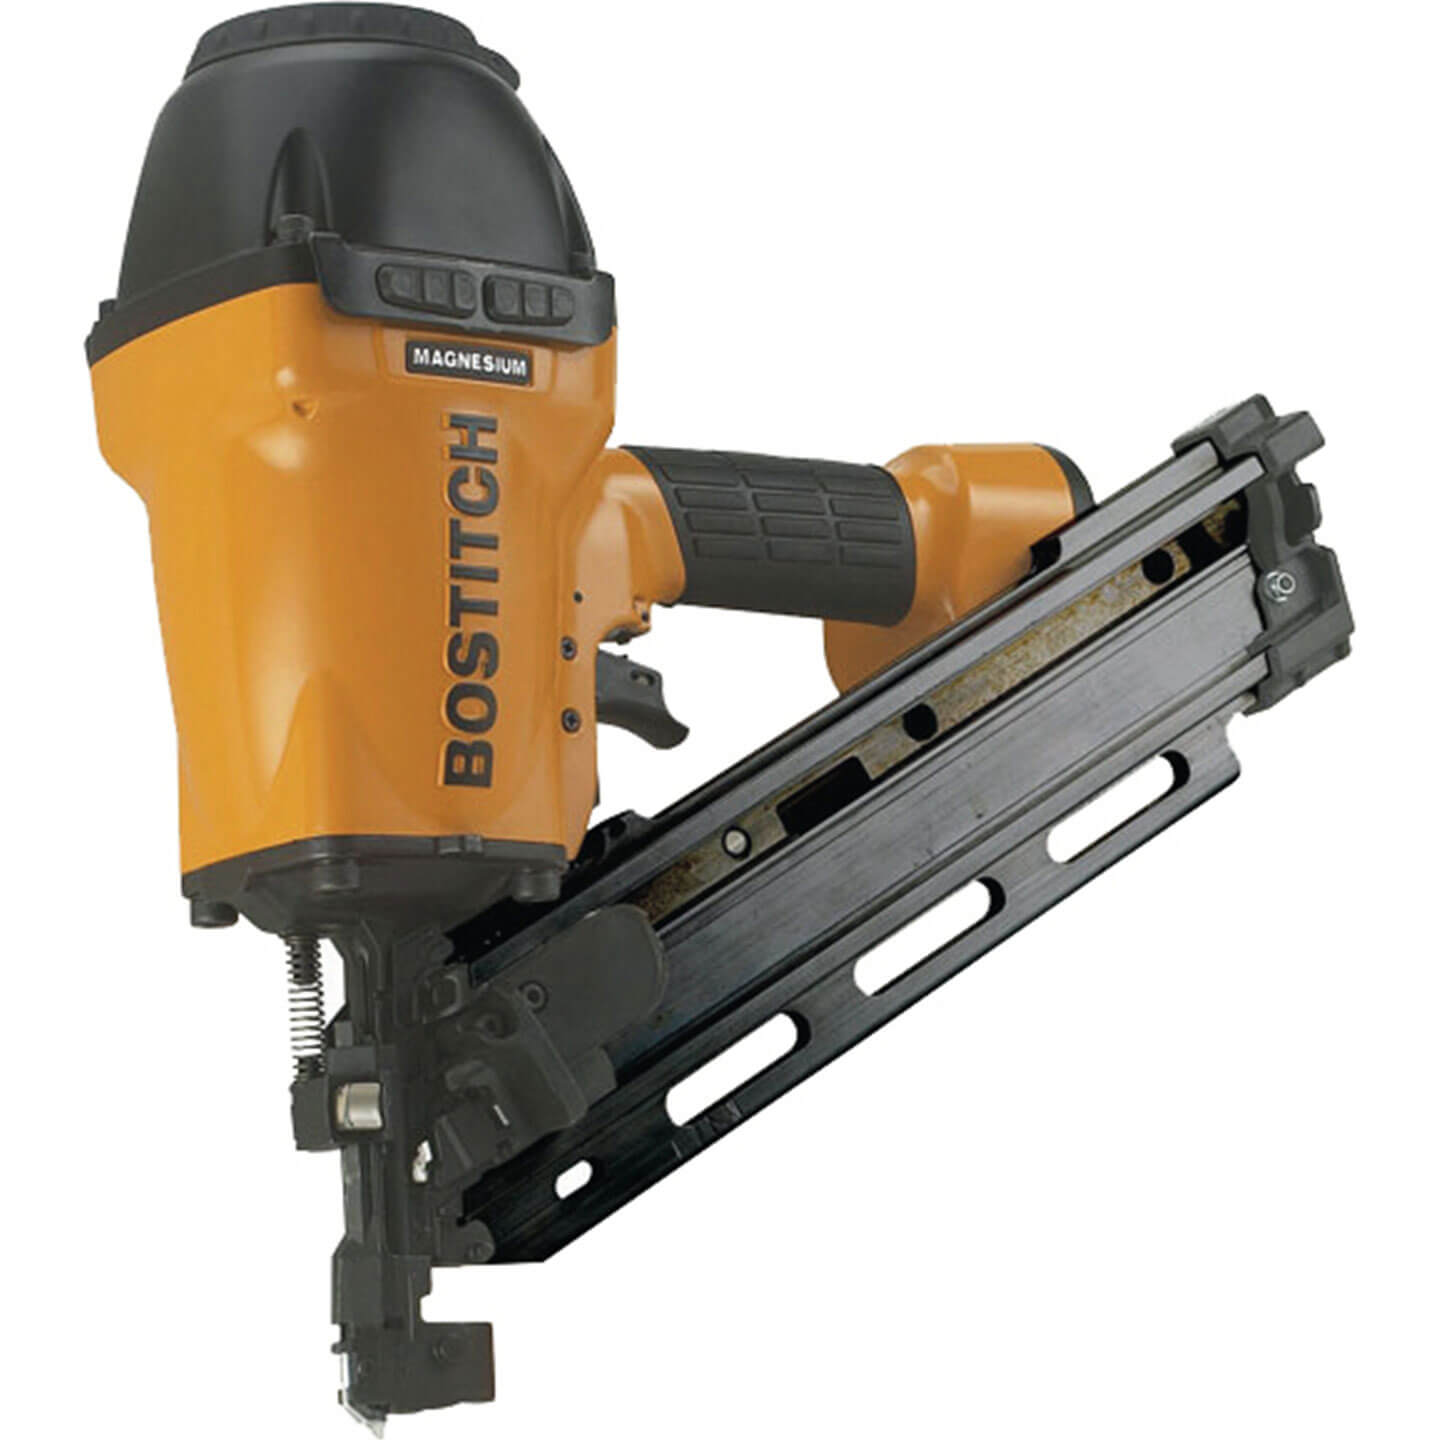 Bostitch 15 Degree Coil Framing Nailer BTF83C from Bostitch - Acme Tools